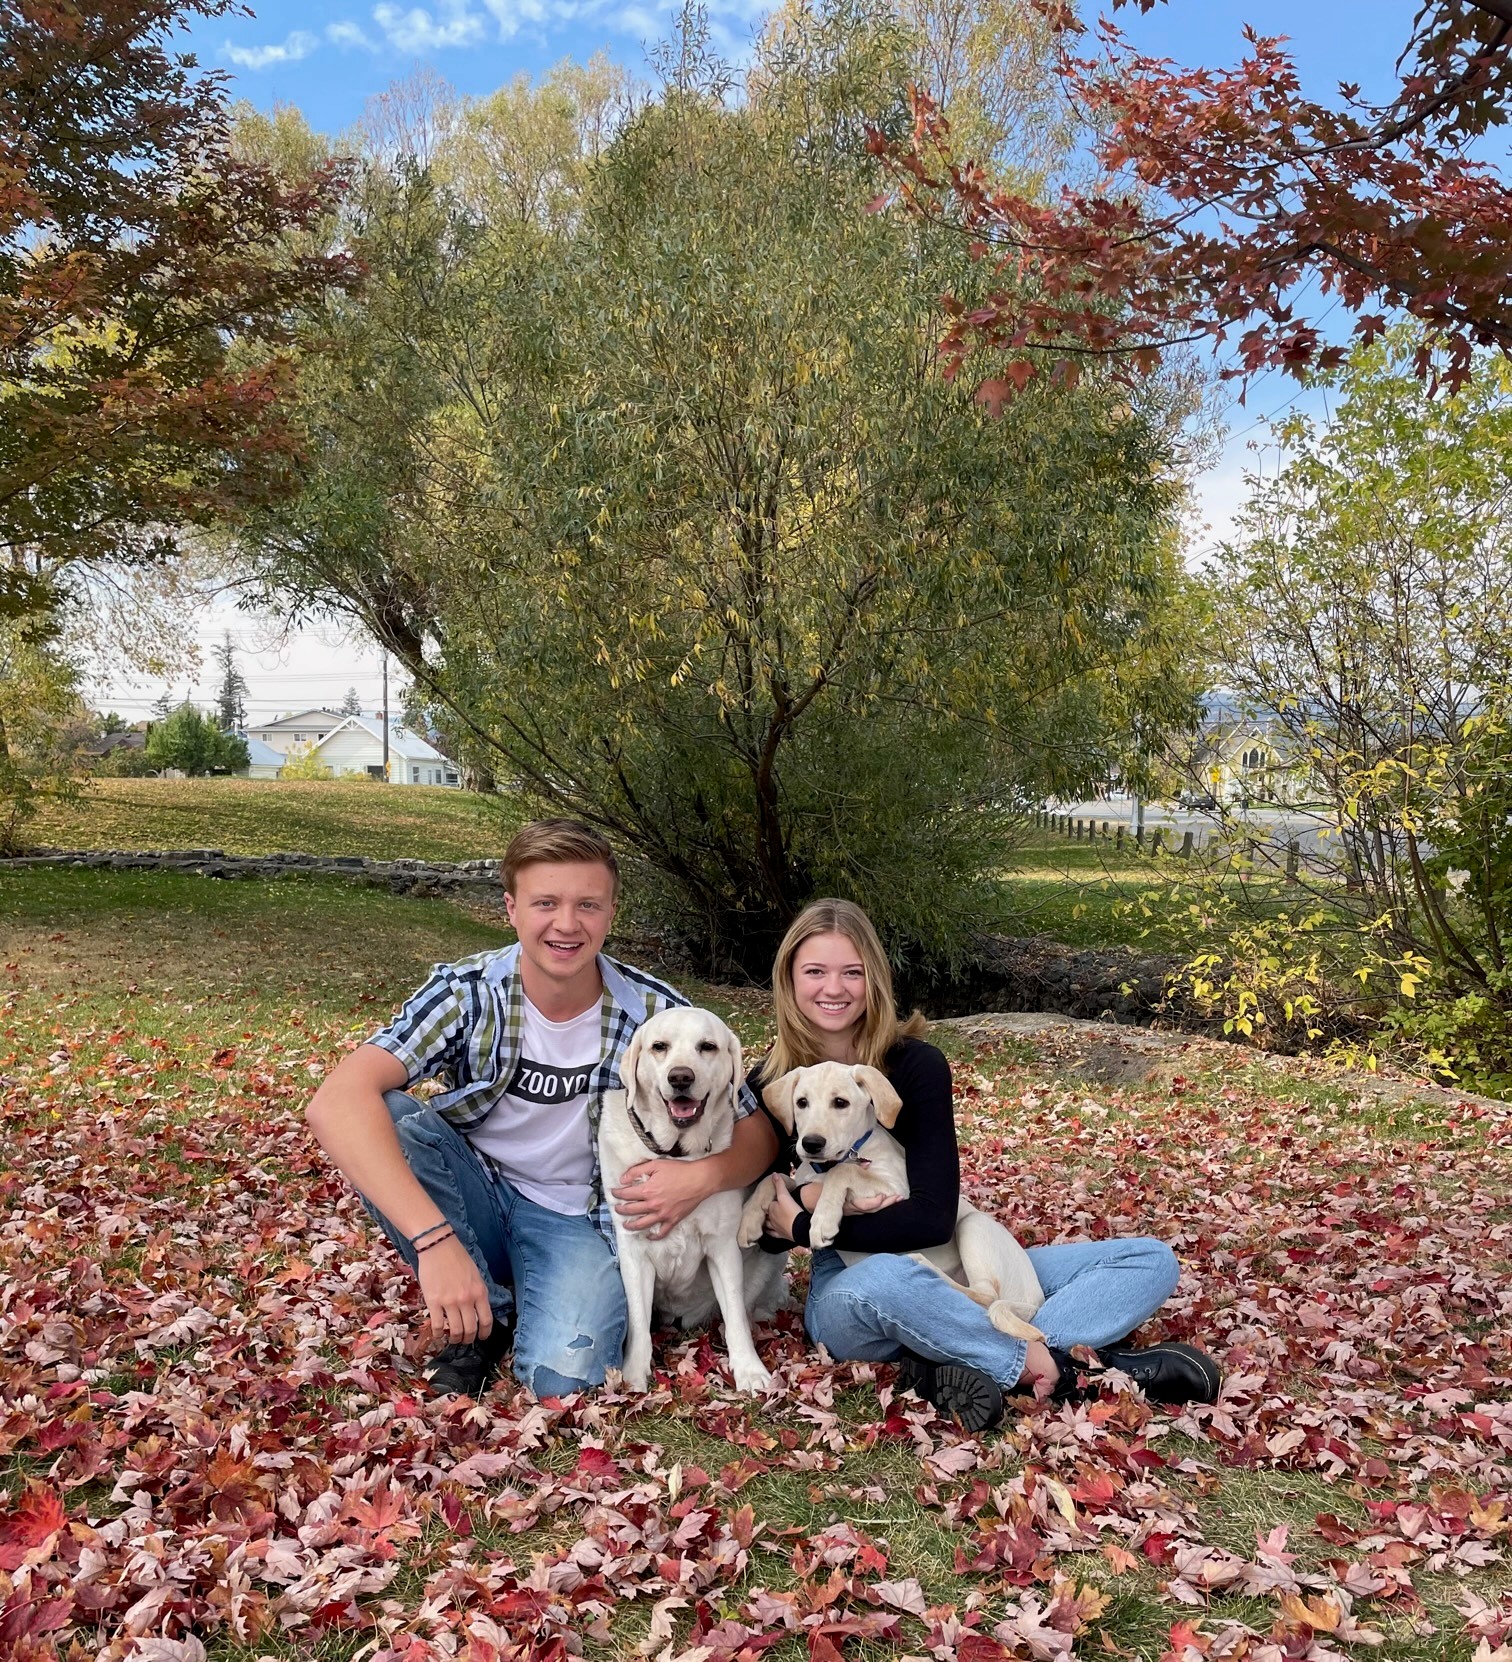 Man and woman wearing jeans smile holding two yellow Labrador dogs sitting on autumn leaves with trees in the background